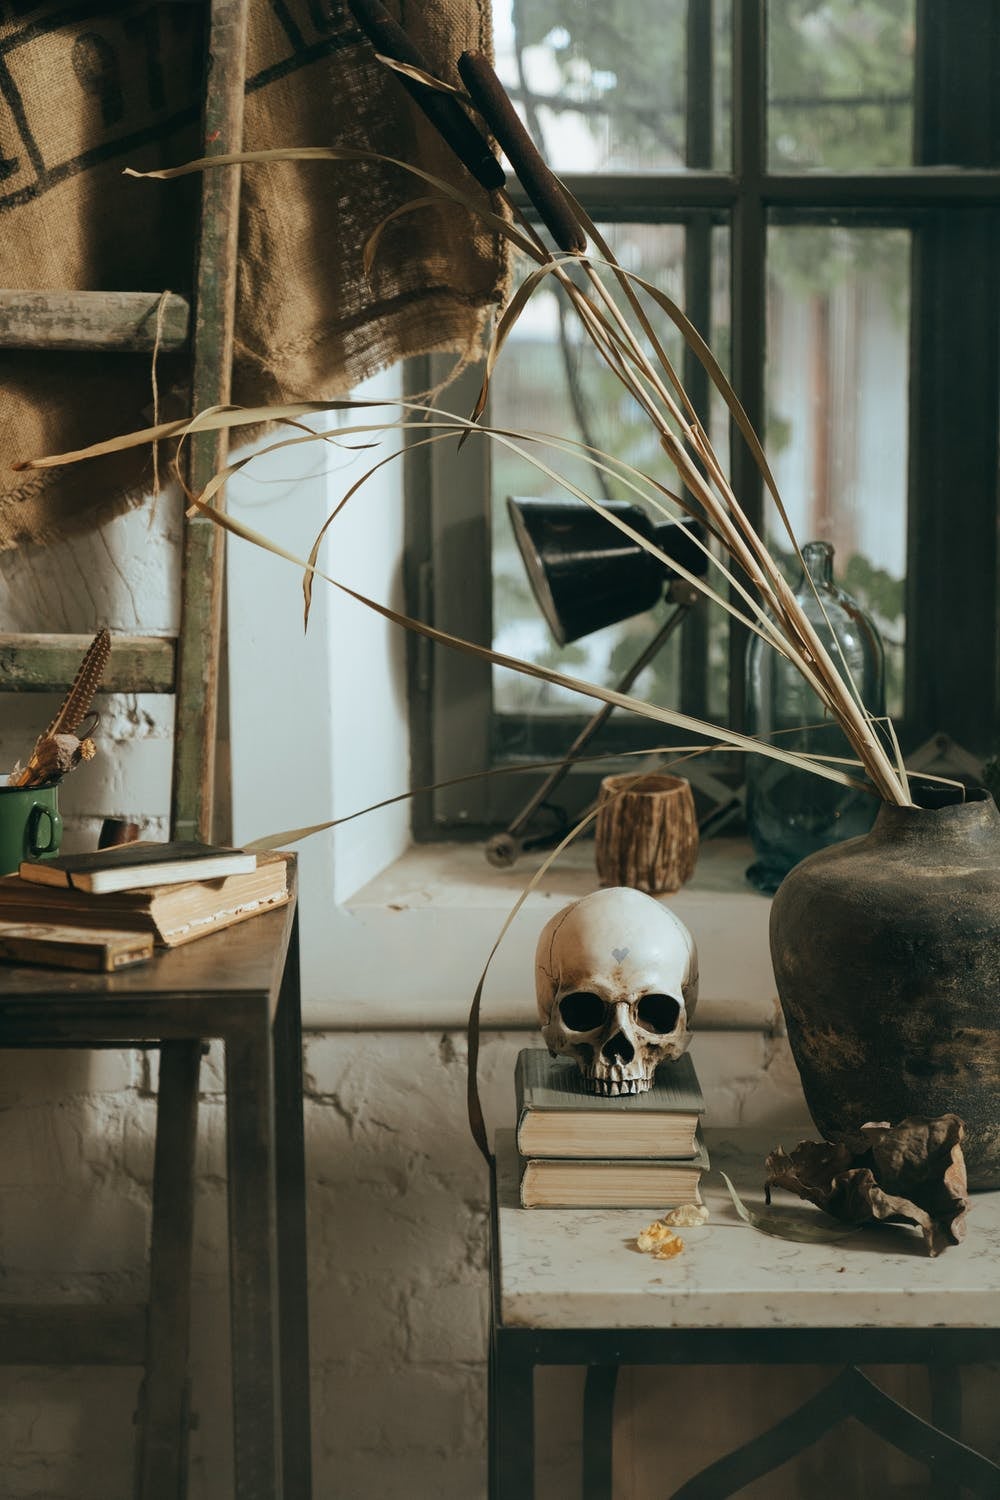 Cottage decor with some plants and a skull